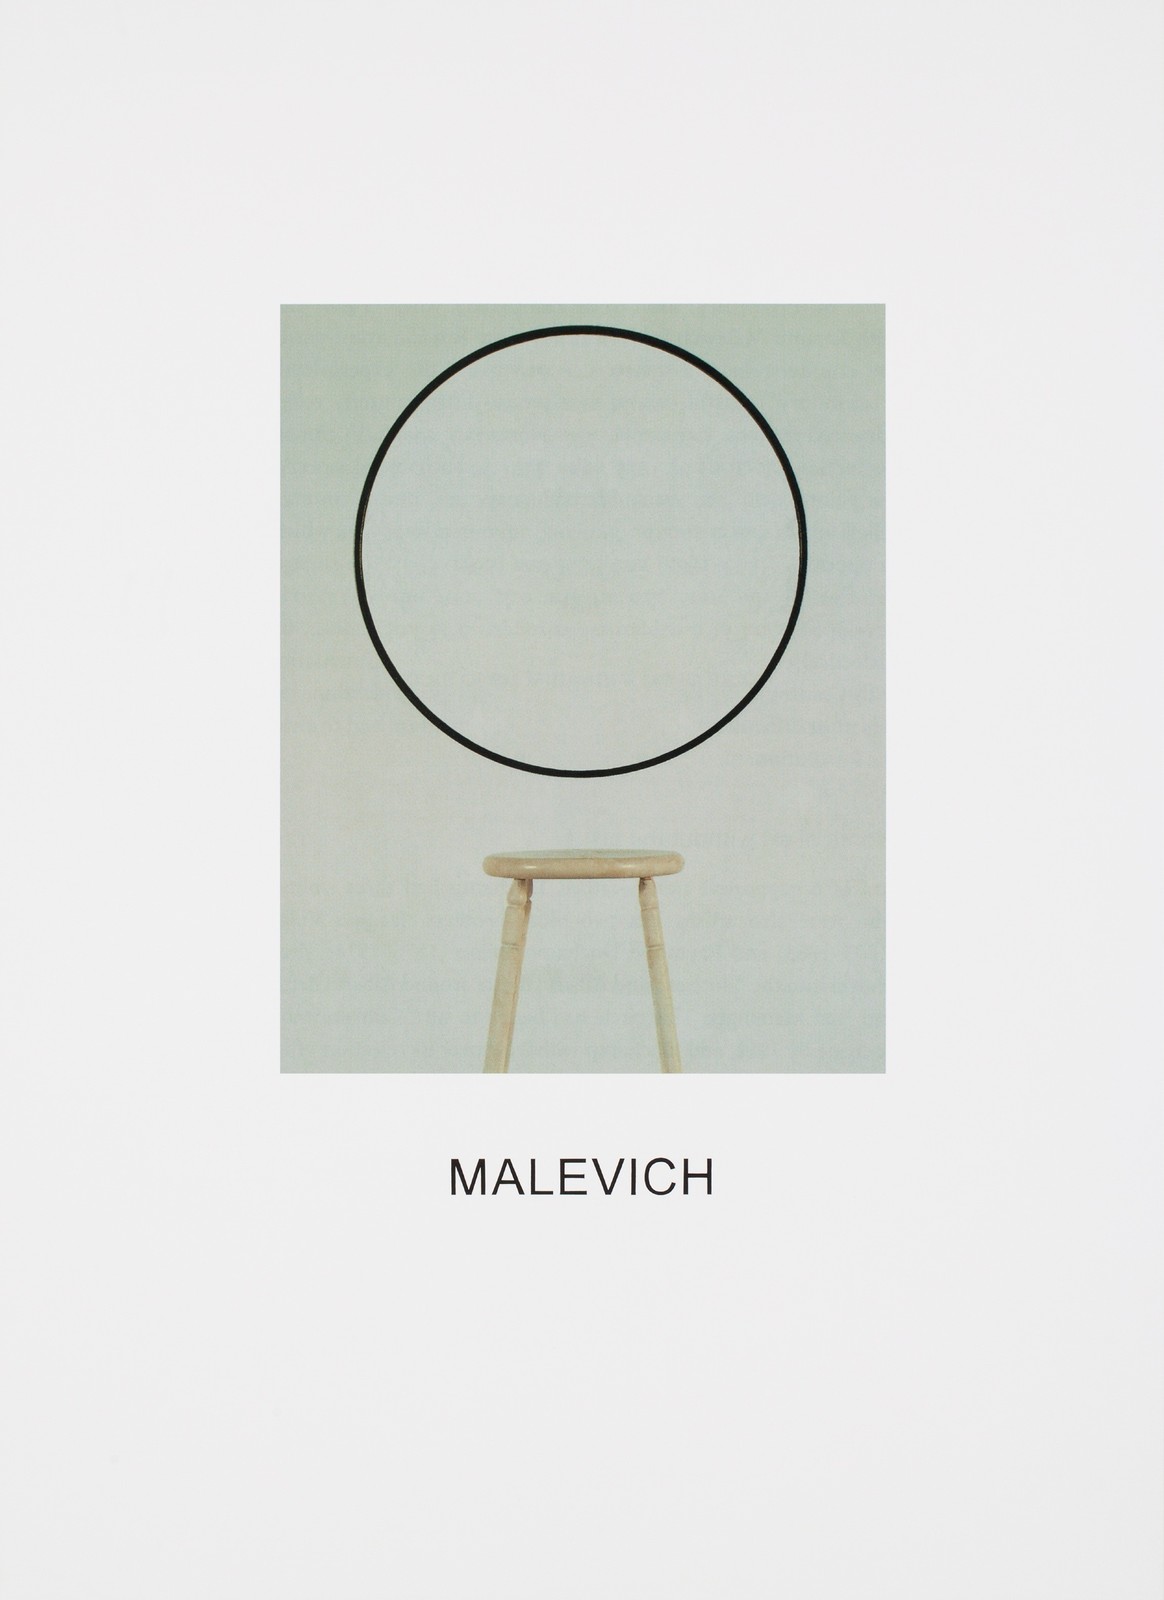 ohn BaldessariDouble Vision: Malevich, 2011Varnished archival print on canvas with oil paint74 1|2 x 54 in/ (189/23 x 137/16 cm)Courtesy of Per-Anders Ovin